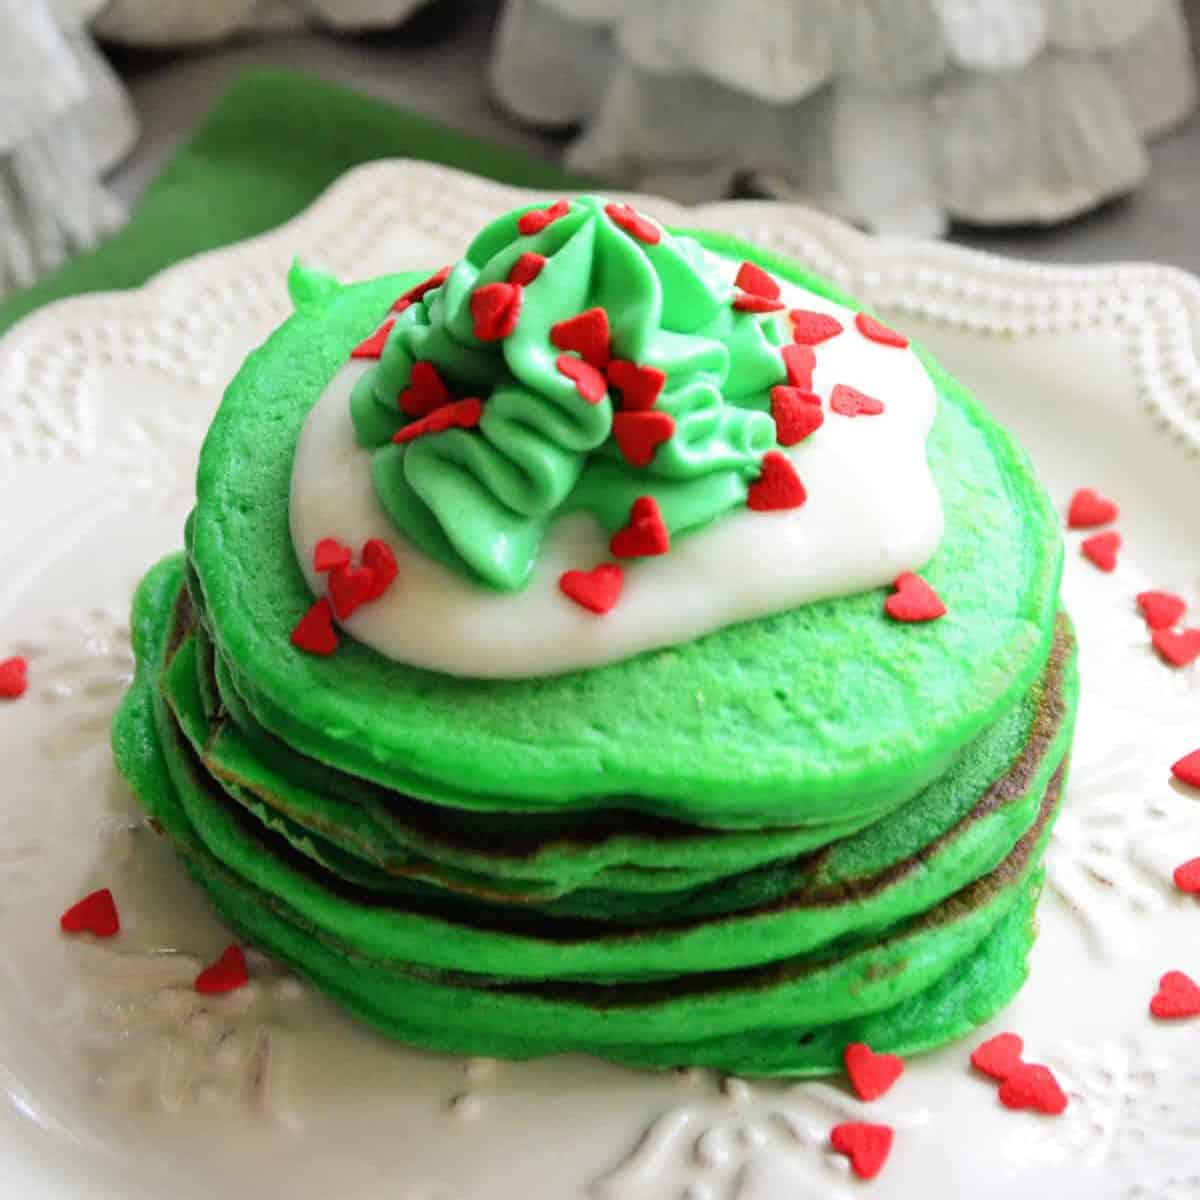 https://www.katiescucina.com/wp-content/uploads/2019/12/Grinch-Pancakes-Square.jpg